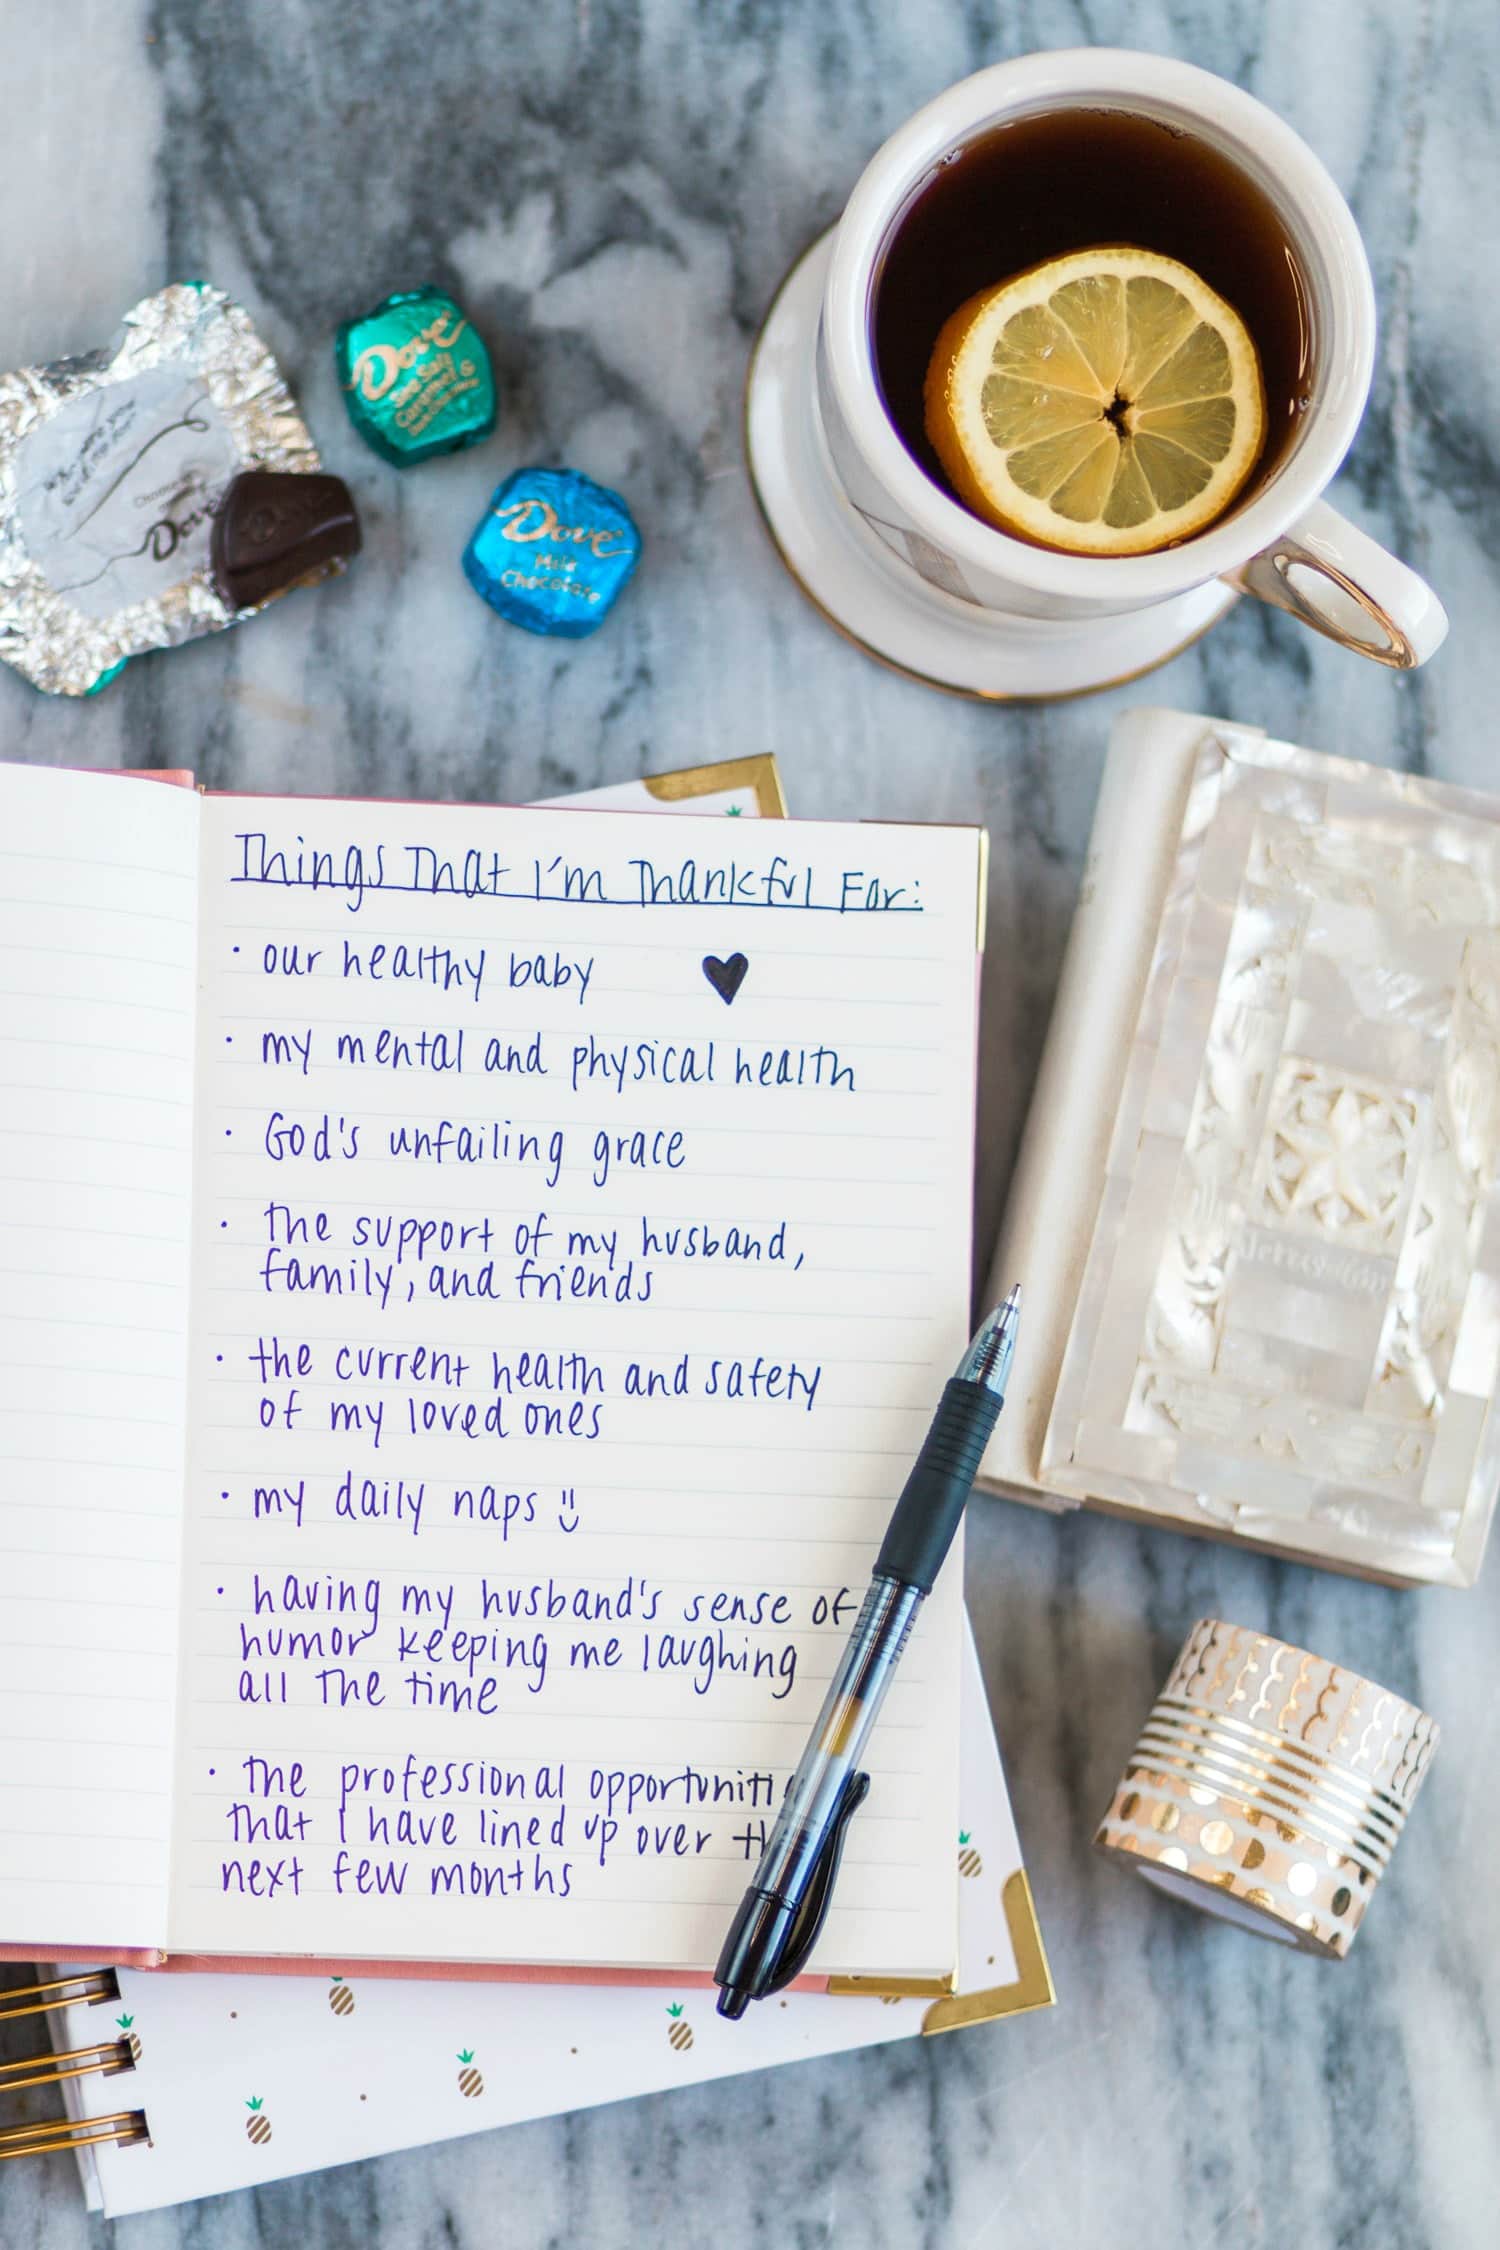 De-stress at the end of a long day by writing in a gratitude journal listing everything in your life that you're grateful for. | 10 easy ways to de-stress after a long day - including a pamper session with your favorite beauty products and creating a gratitude journal! #unwindwithdove sponsored by @DOVEChocolateUS | Dove chocolate, stress relief, how to relieve stress, how to calm down, gold candle, stress relief tips, pineapple plate, white and gold, white and gold pineapple, rhinestone bracelet, beautiful jewelry, beautiful flatlay, flatlay, red lipstick, magenta lipstick, white pink nail polish, girly inspiration | Florida lifestyle blogger Ashley Brooke Nicholas